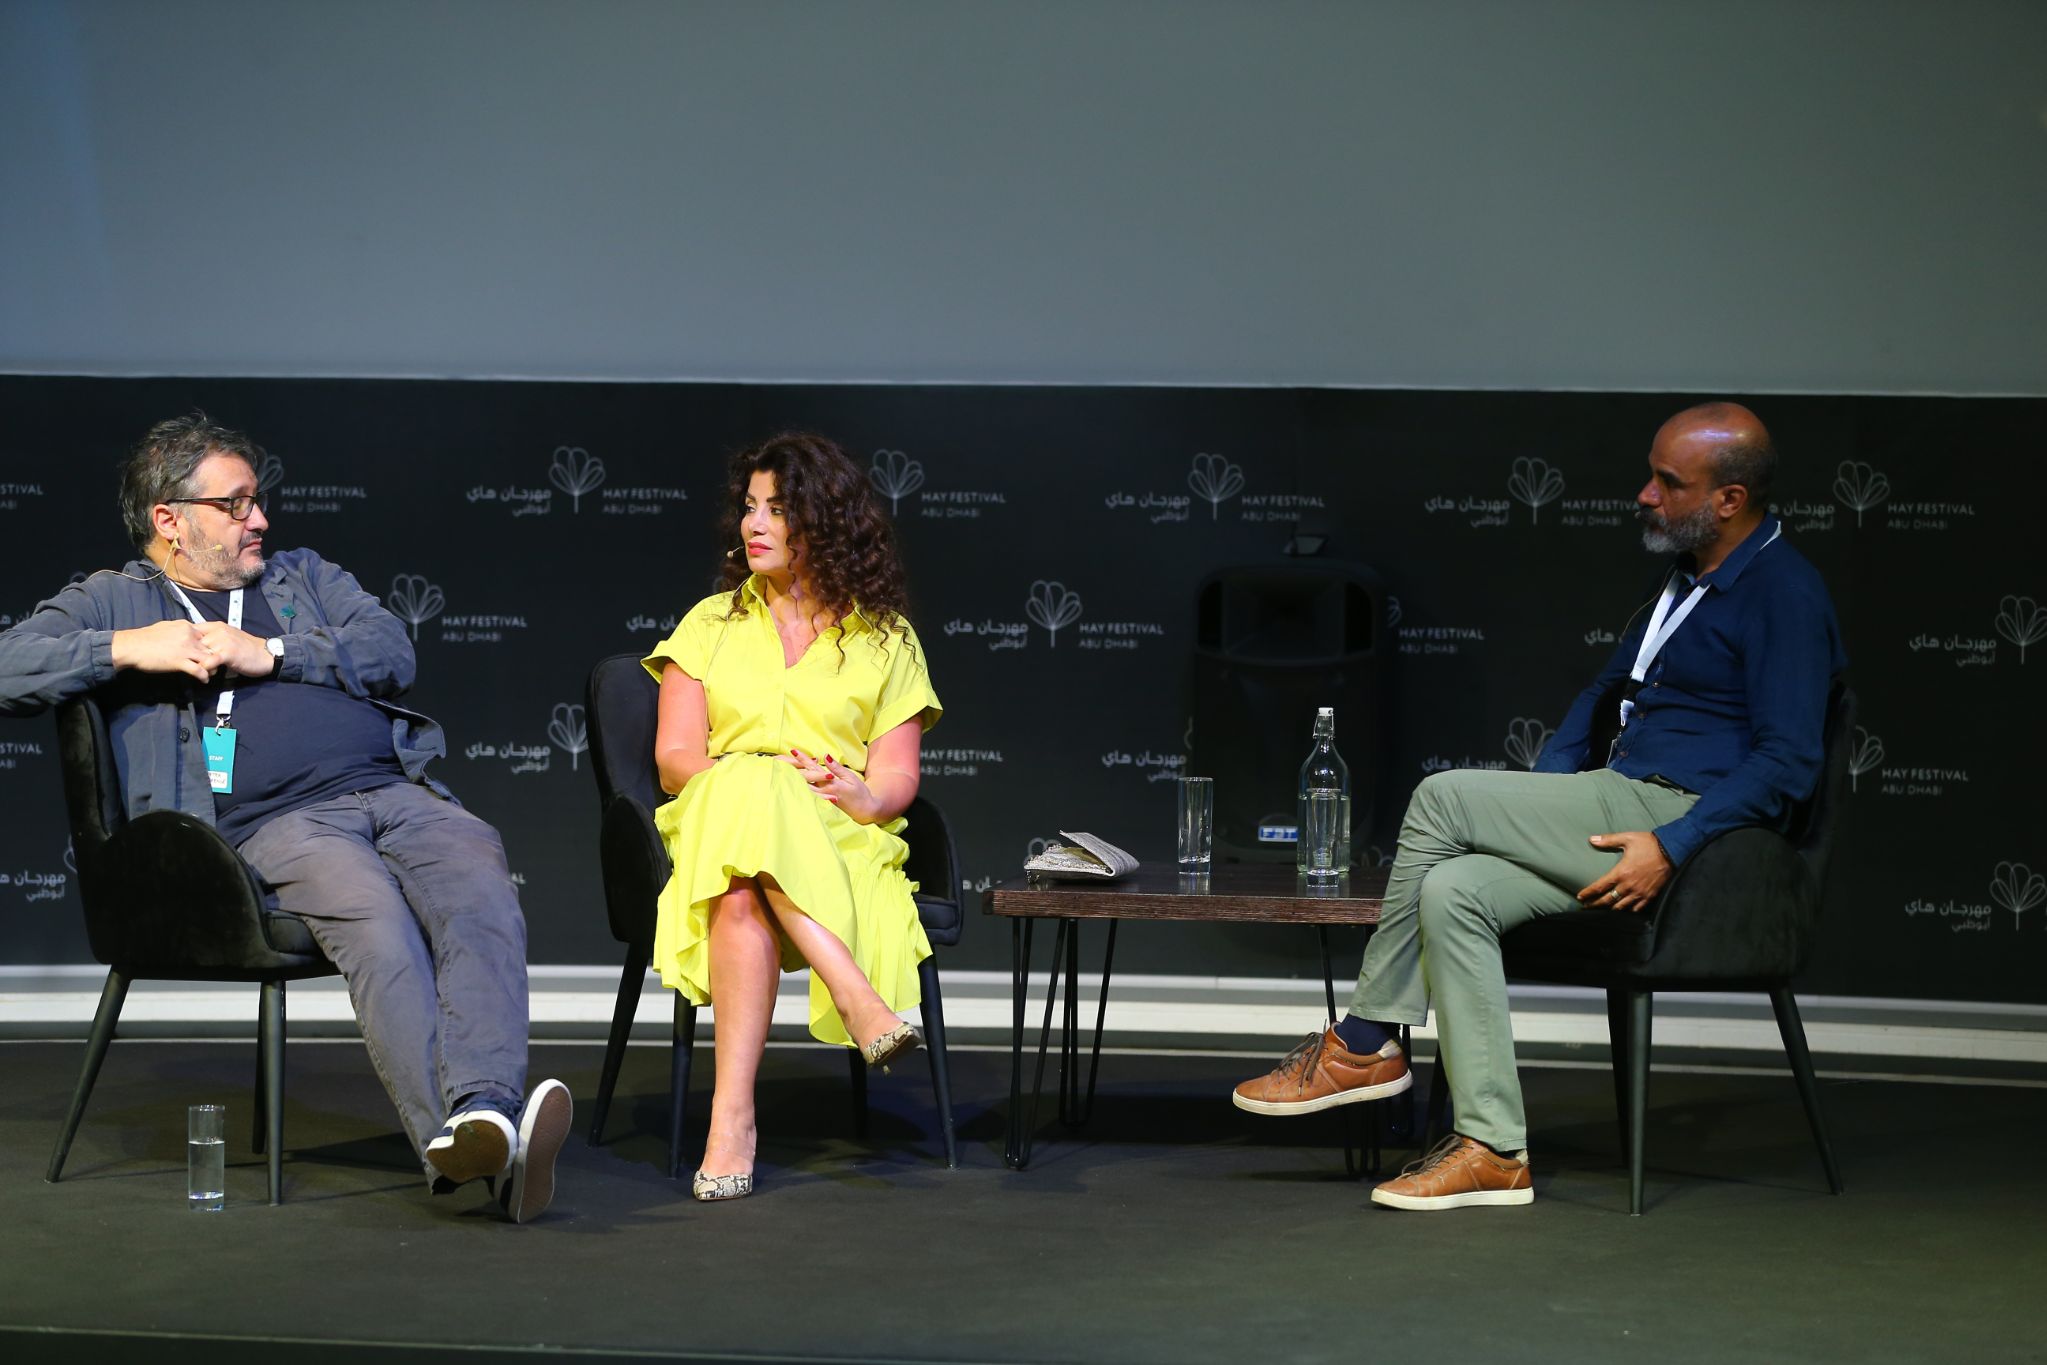 Youssef Rakha (R) with writer Joumana Haddad (C) and festival director Peter Florence (L) at the Hay Festival Abu Dhabi, February 2020 (Courtesy of The Hay Festival)